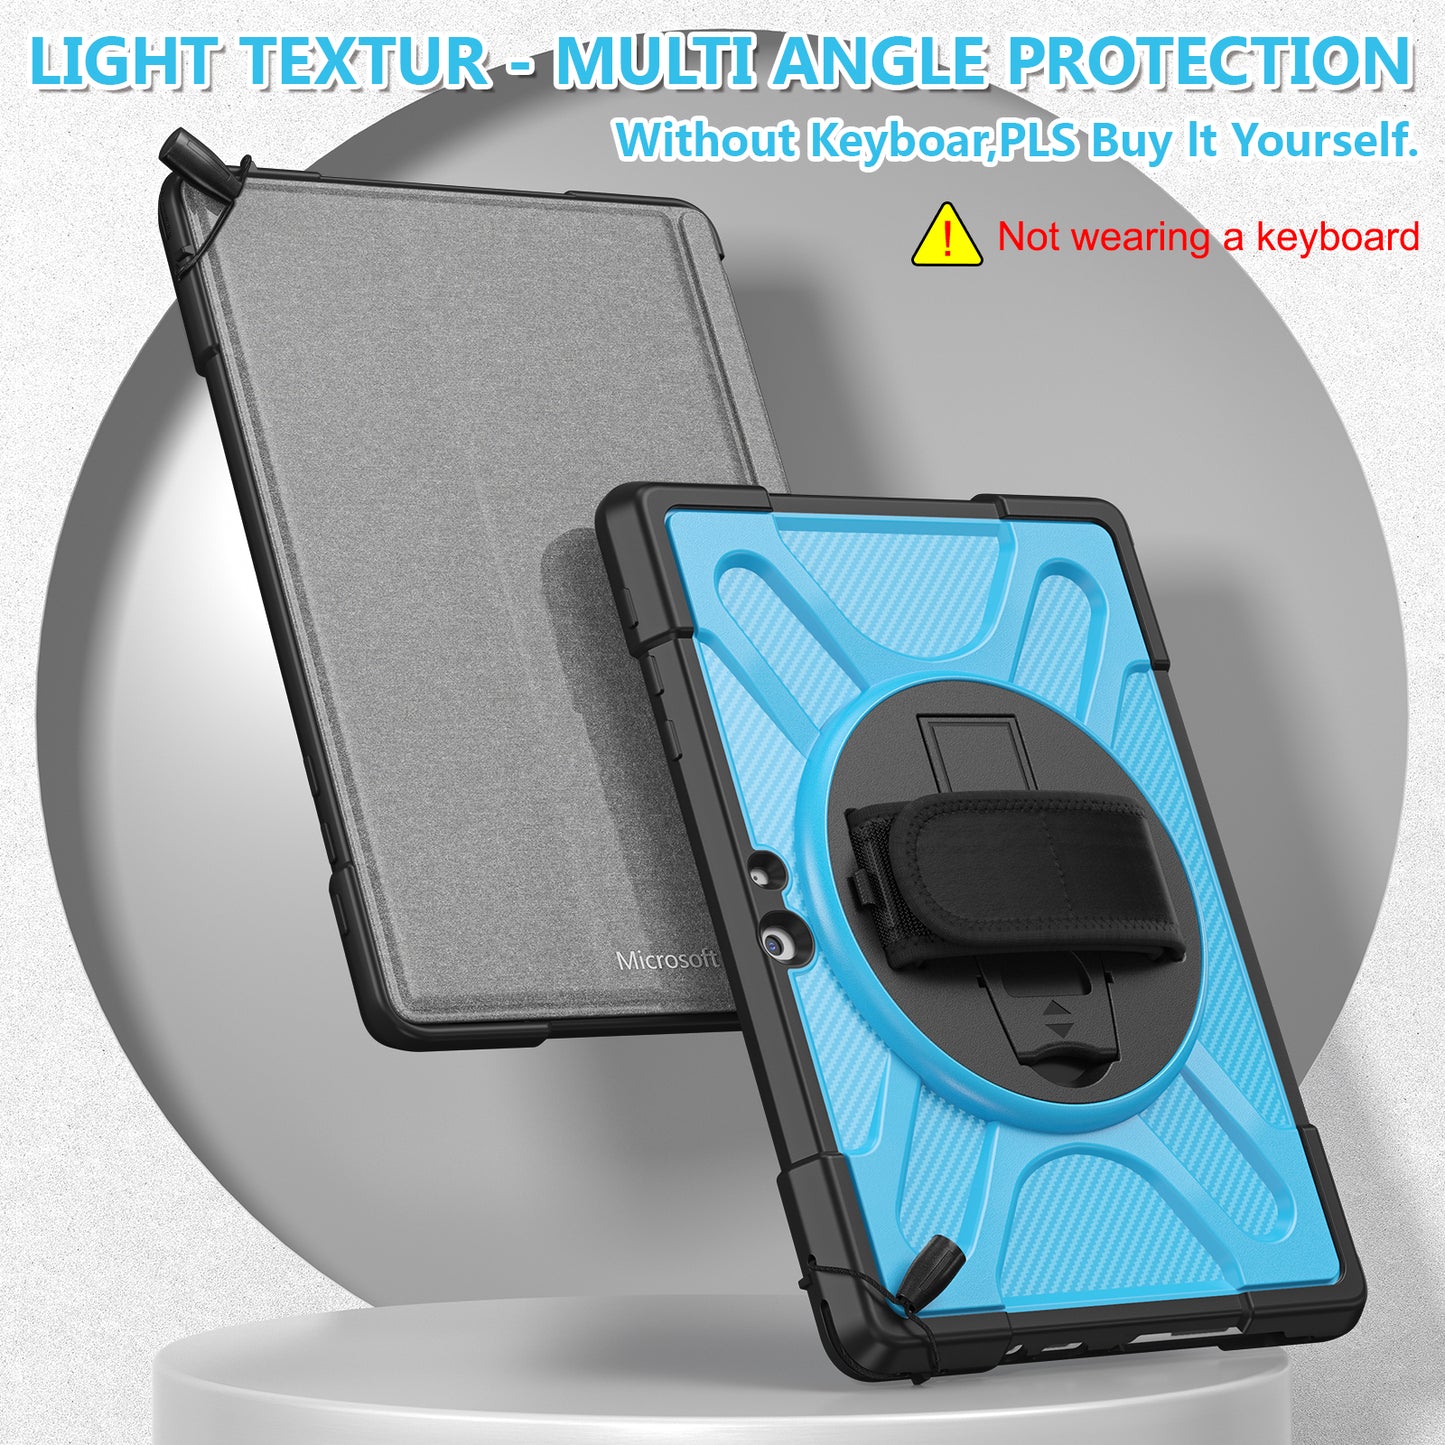 Jacket Beer Microsoft Surface Go 2 Case Light Textur Multi Angle Protection Stable Stand